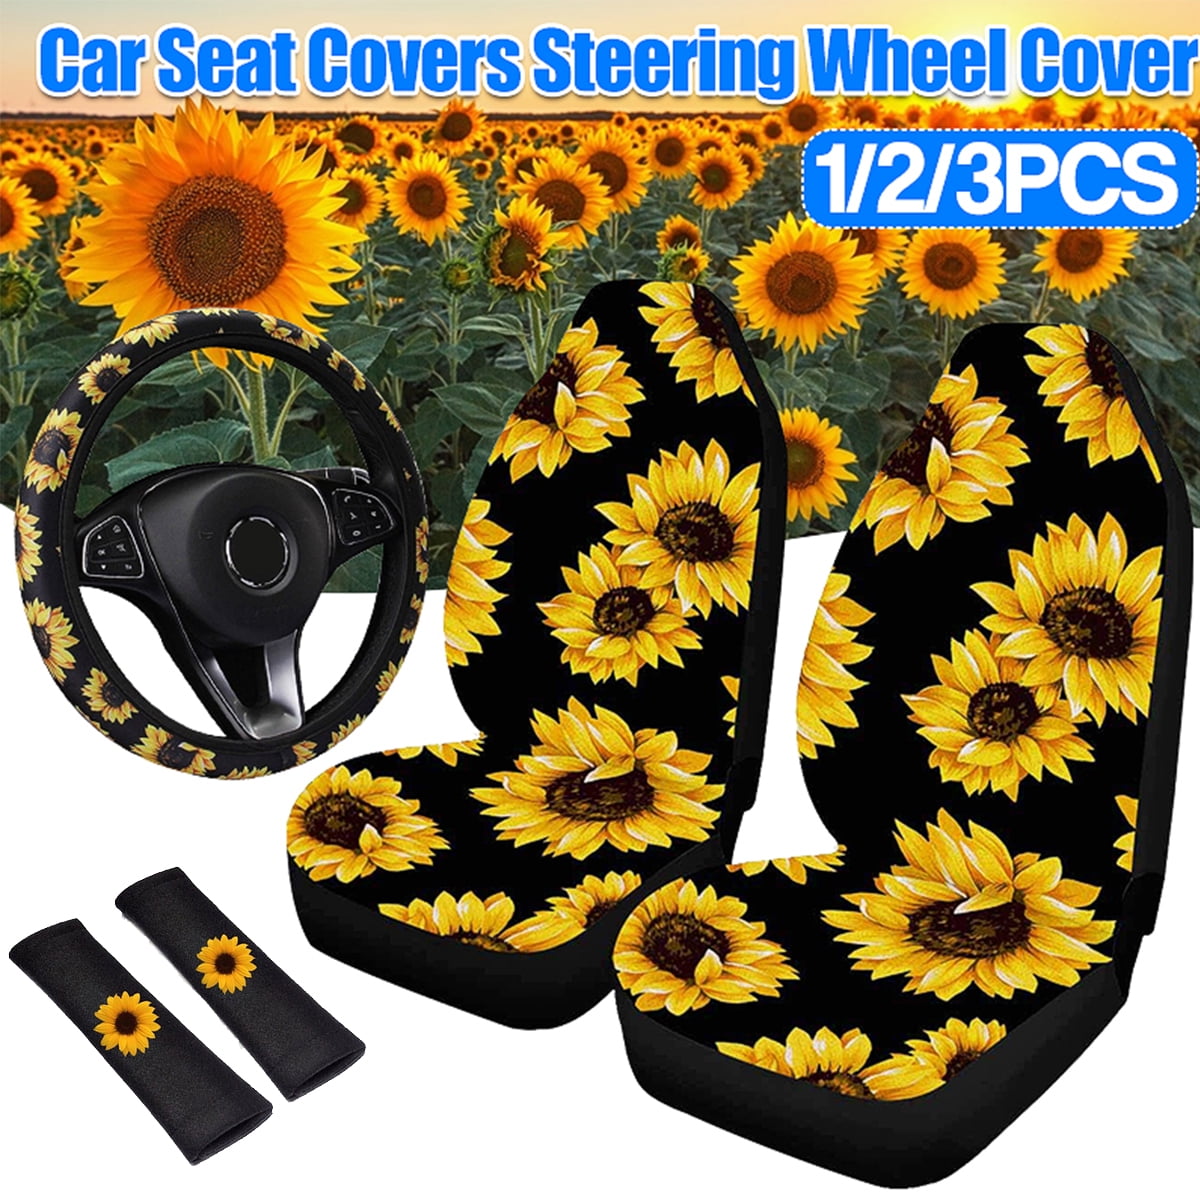 Sunflower Car Accessories Set Seat Covers Steering Wheel Console Covers 